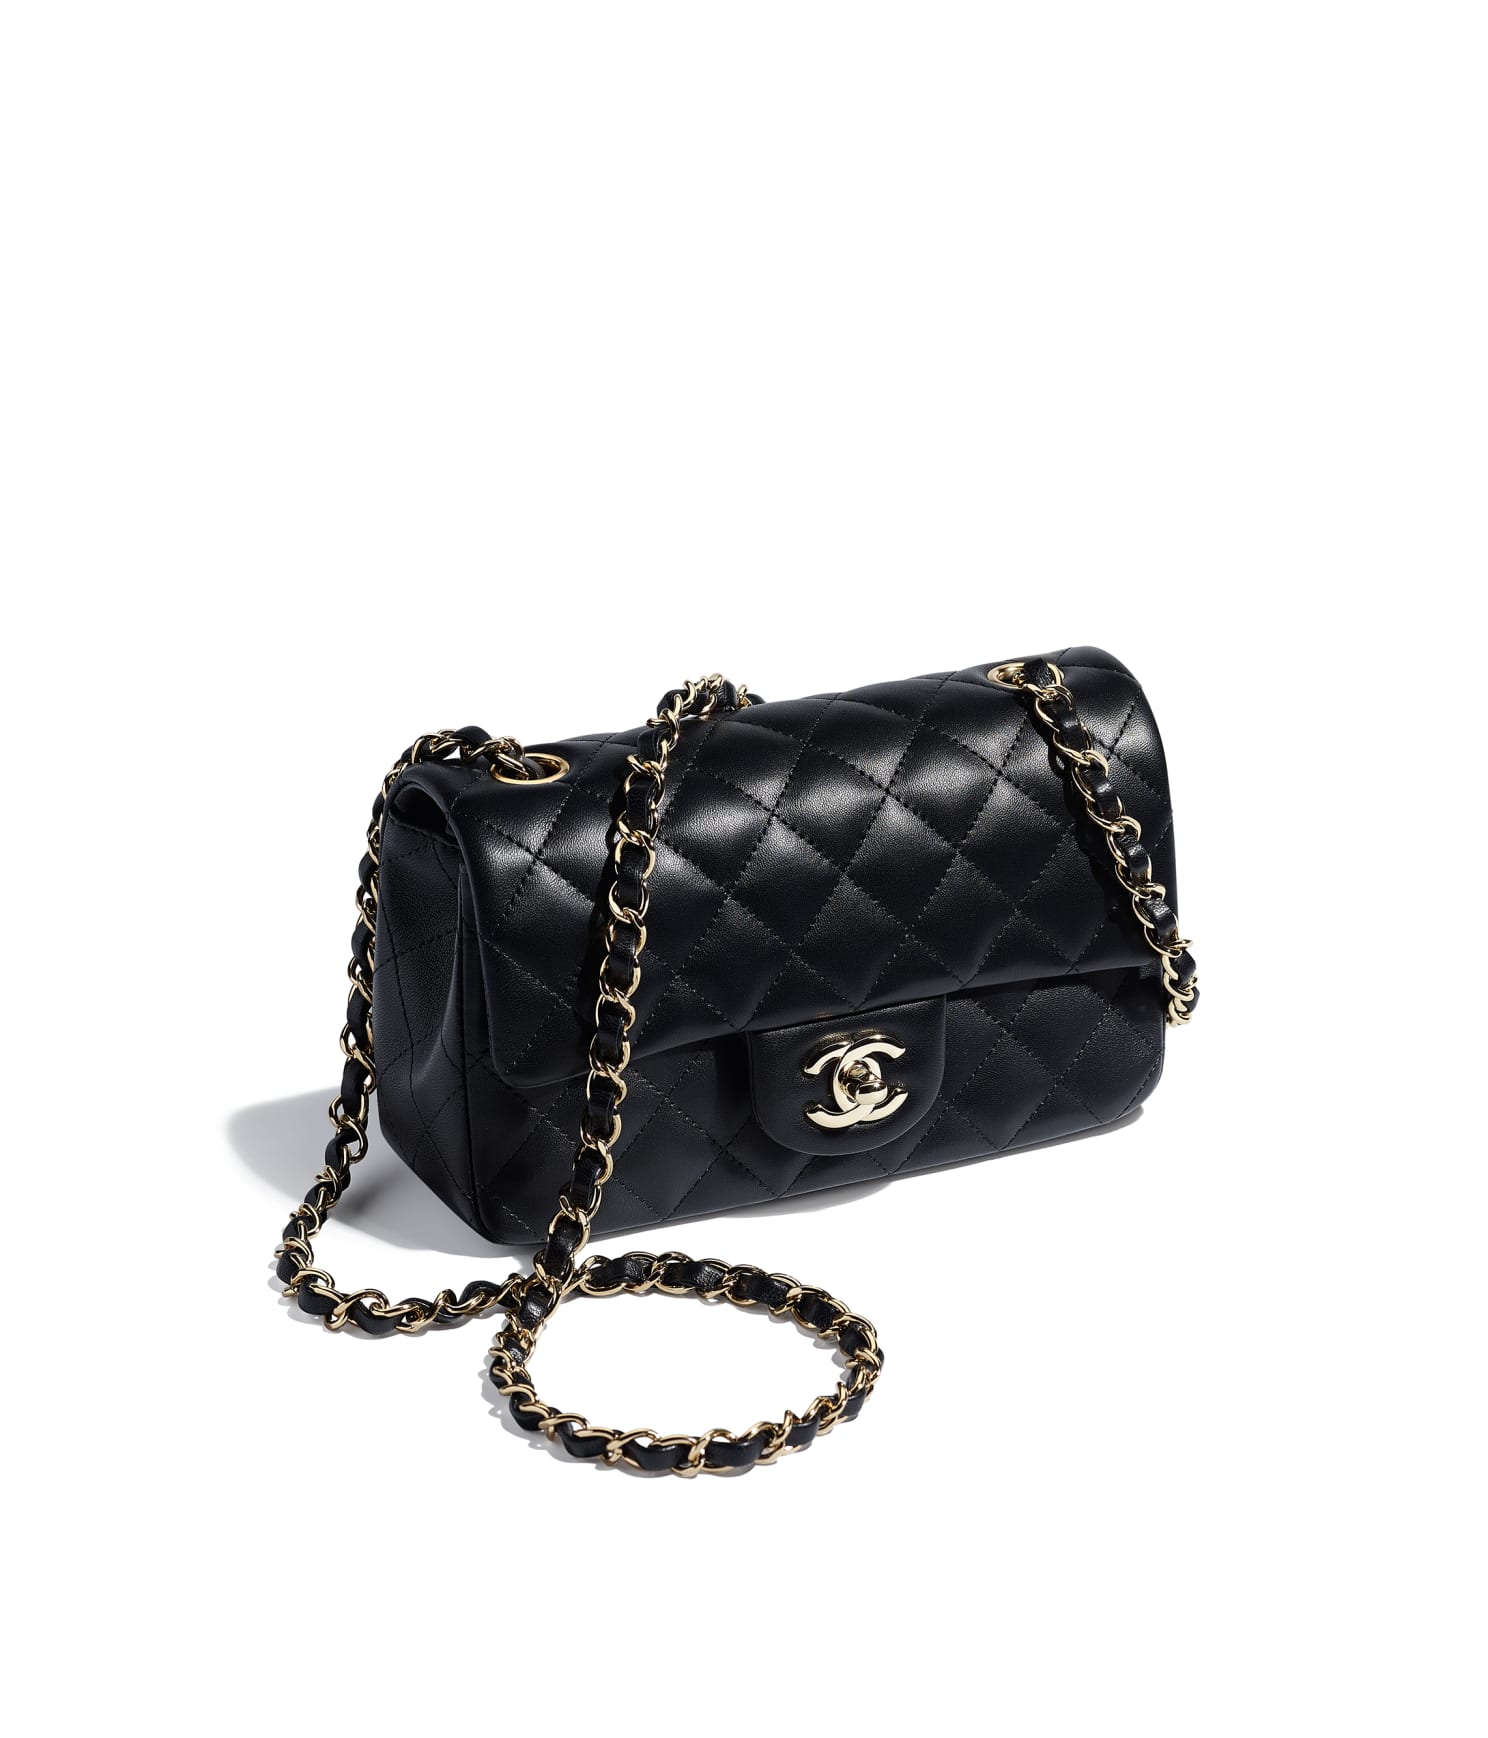 Chanel Classic Bag Price Increase Effective November 3rd